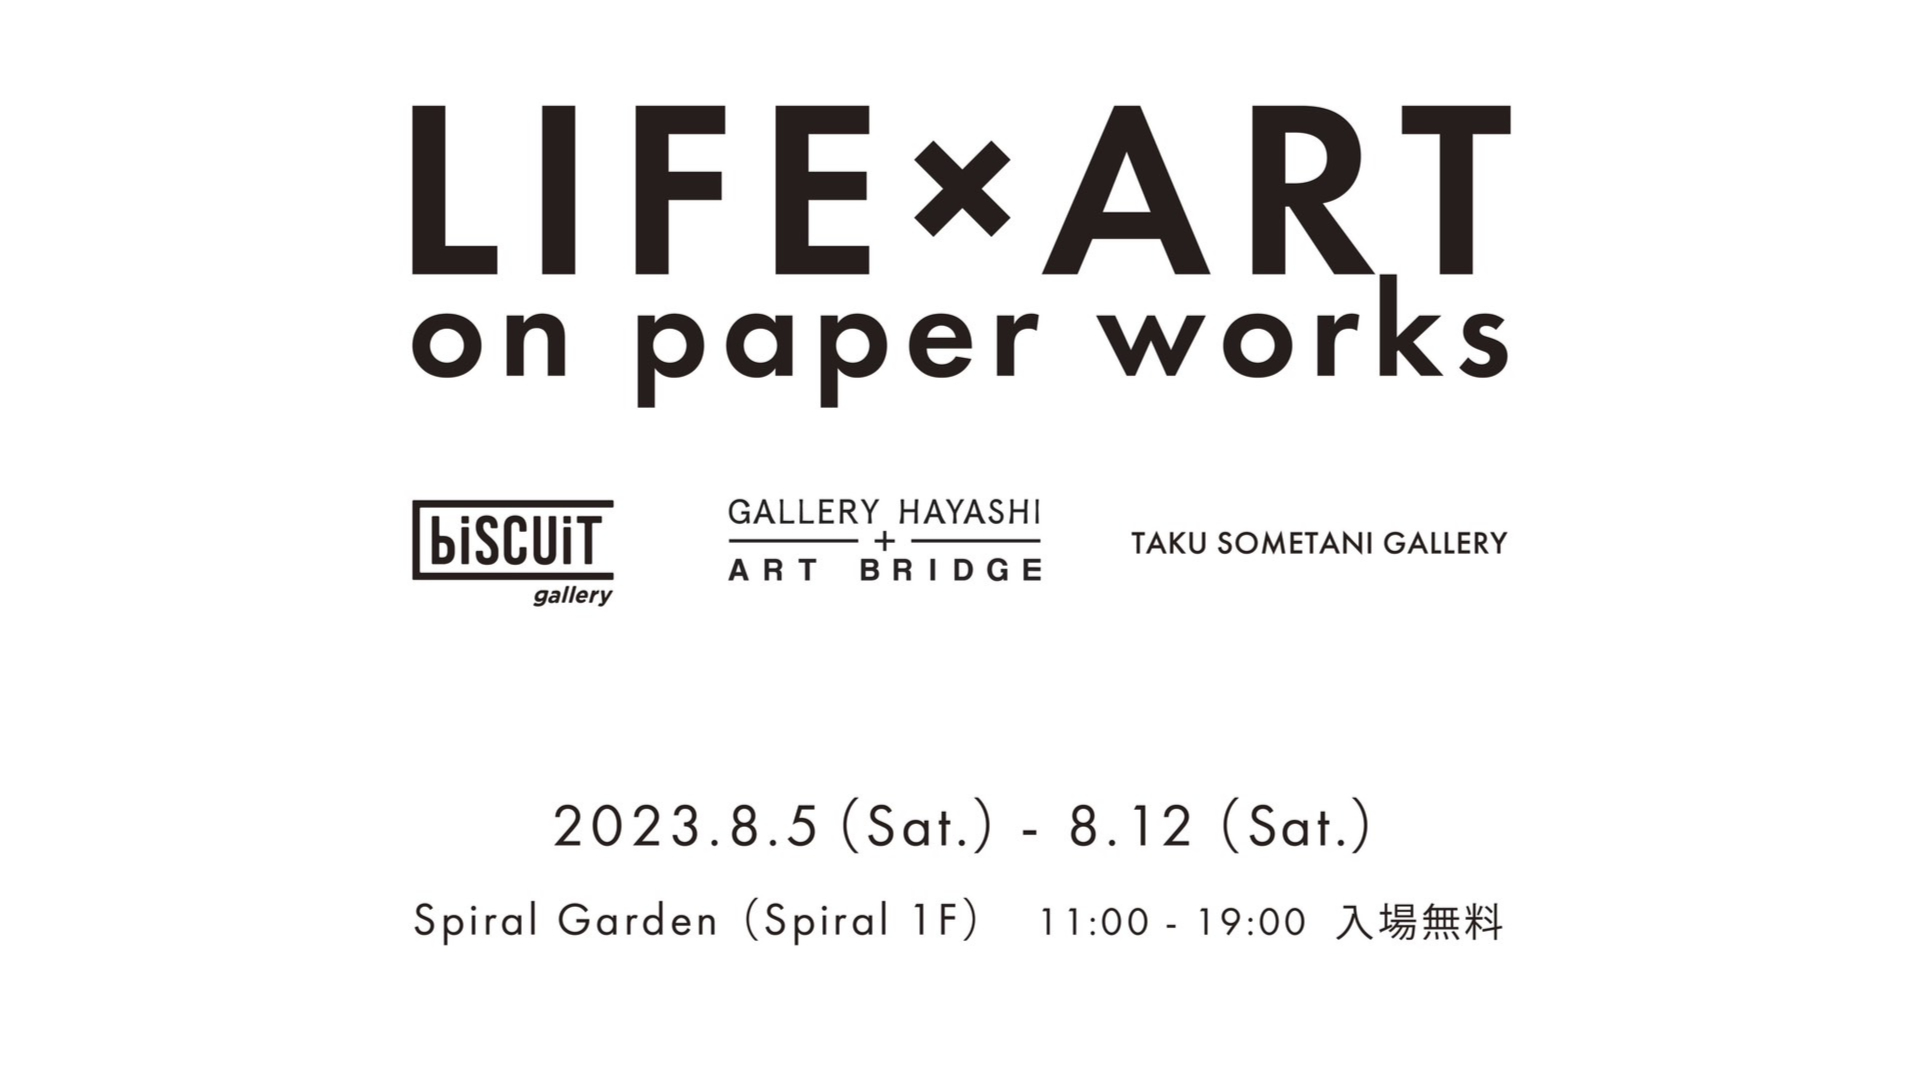 LIFE × ART on paper works